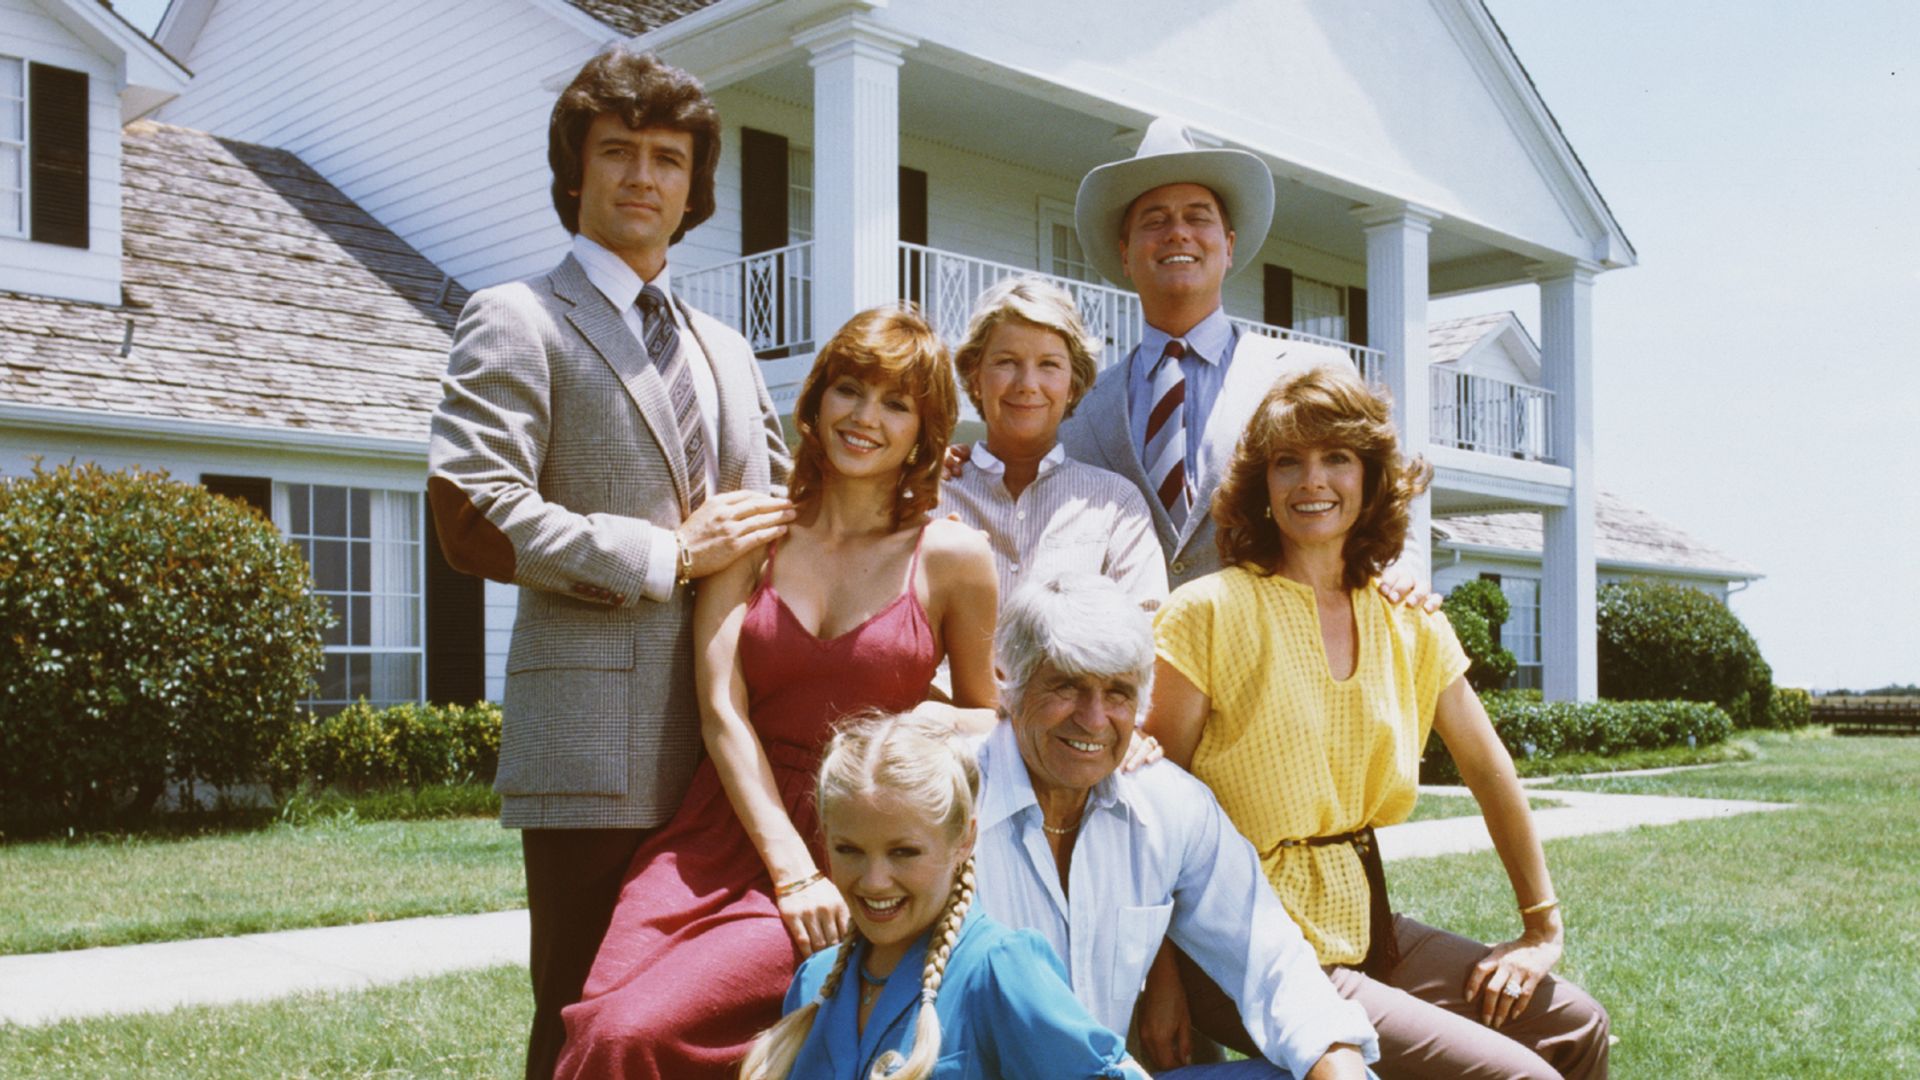 A promotional still from the American television series 'Dallas' shows members of the Ewing family as they pose in front of their television home, the Southfork Ranch, Dallas, Texas, 1979